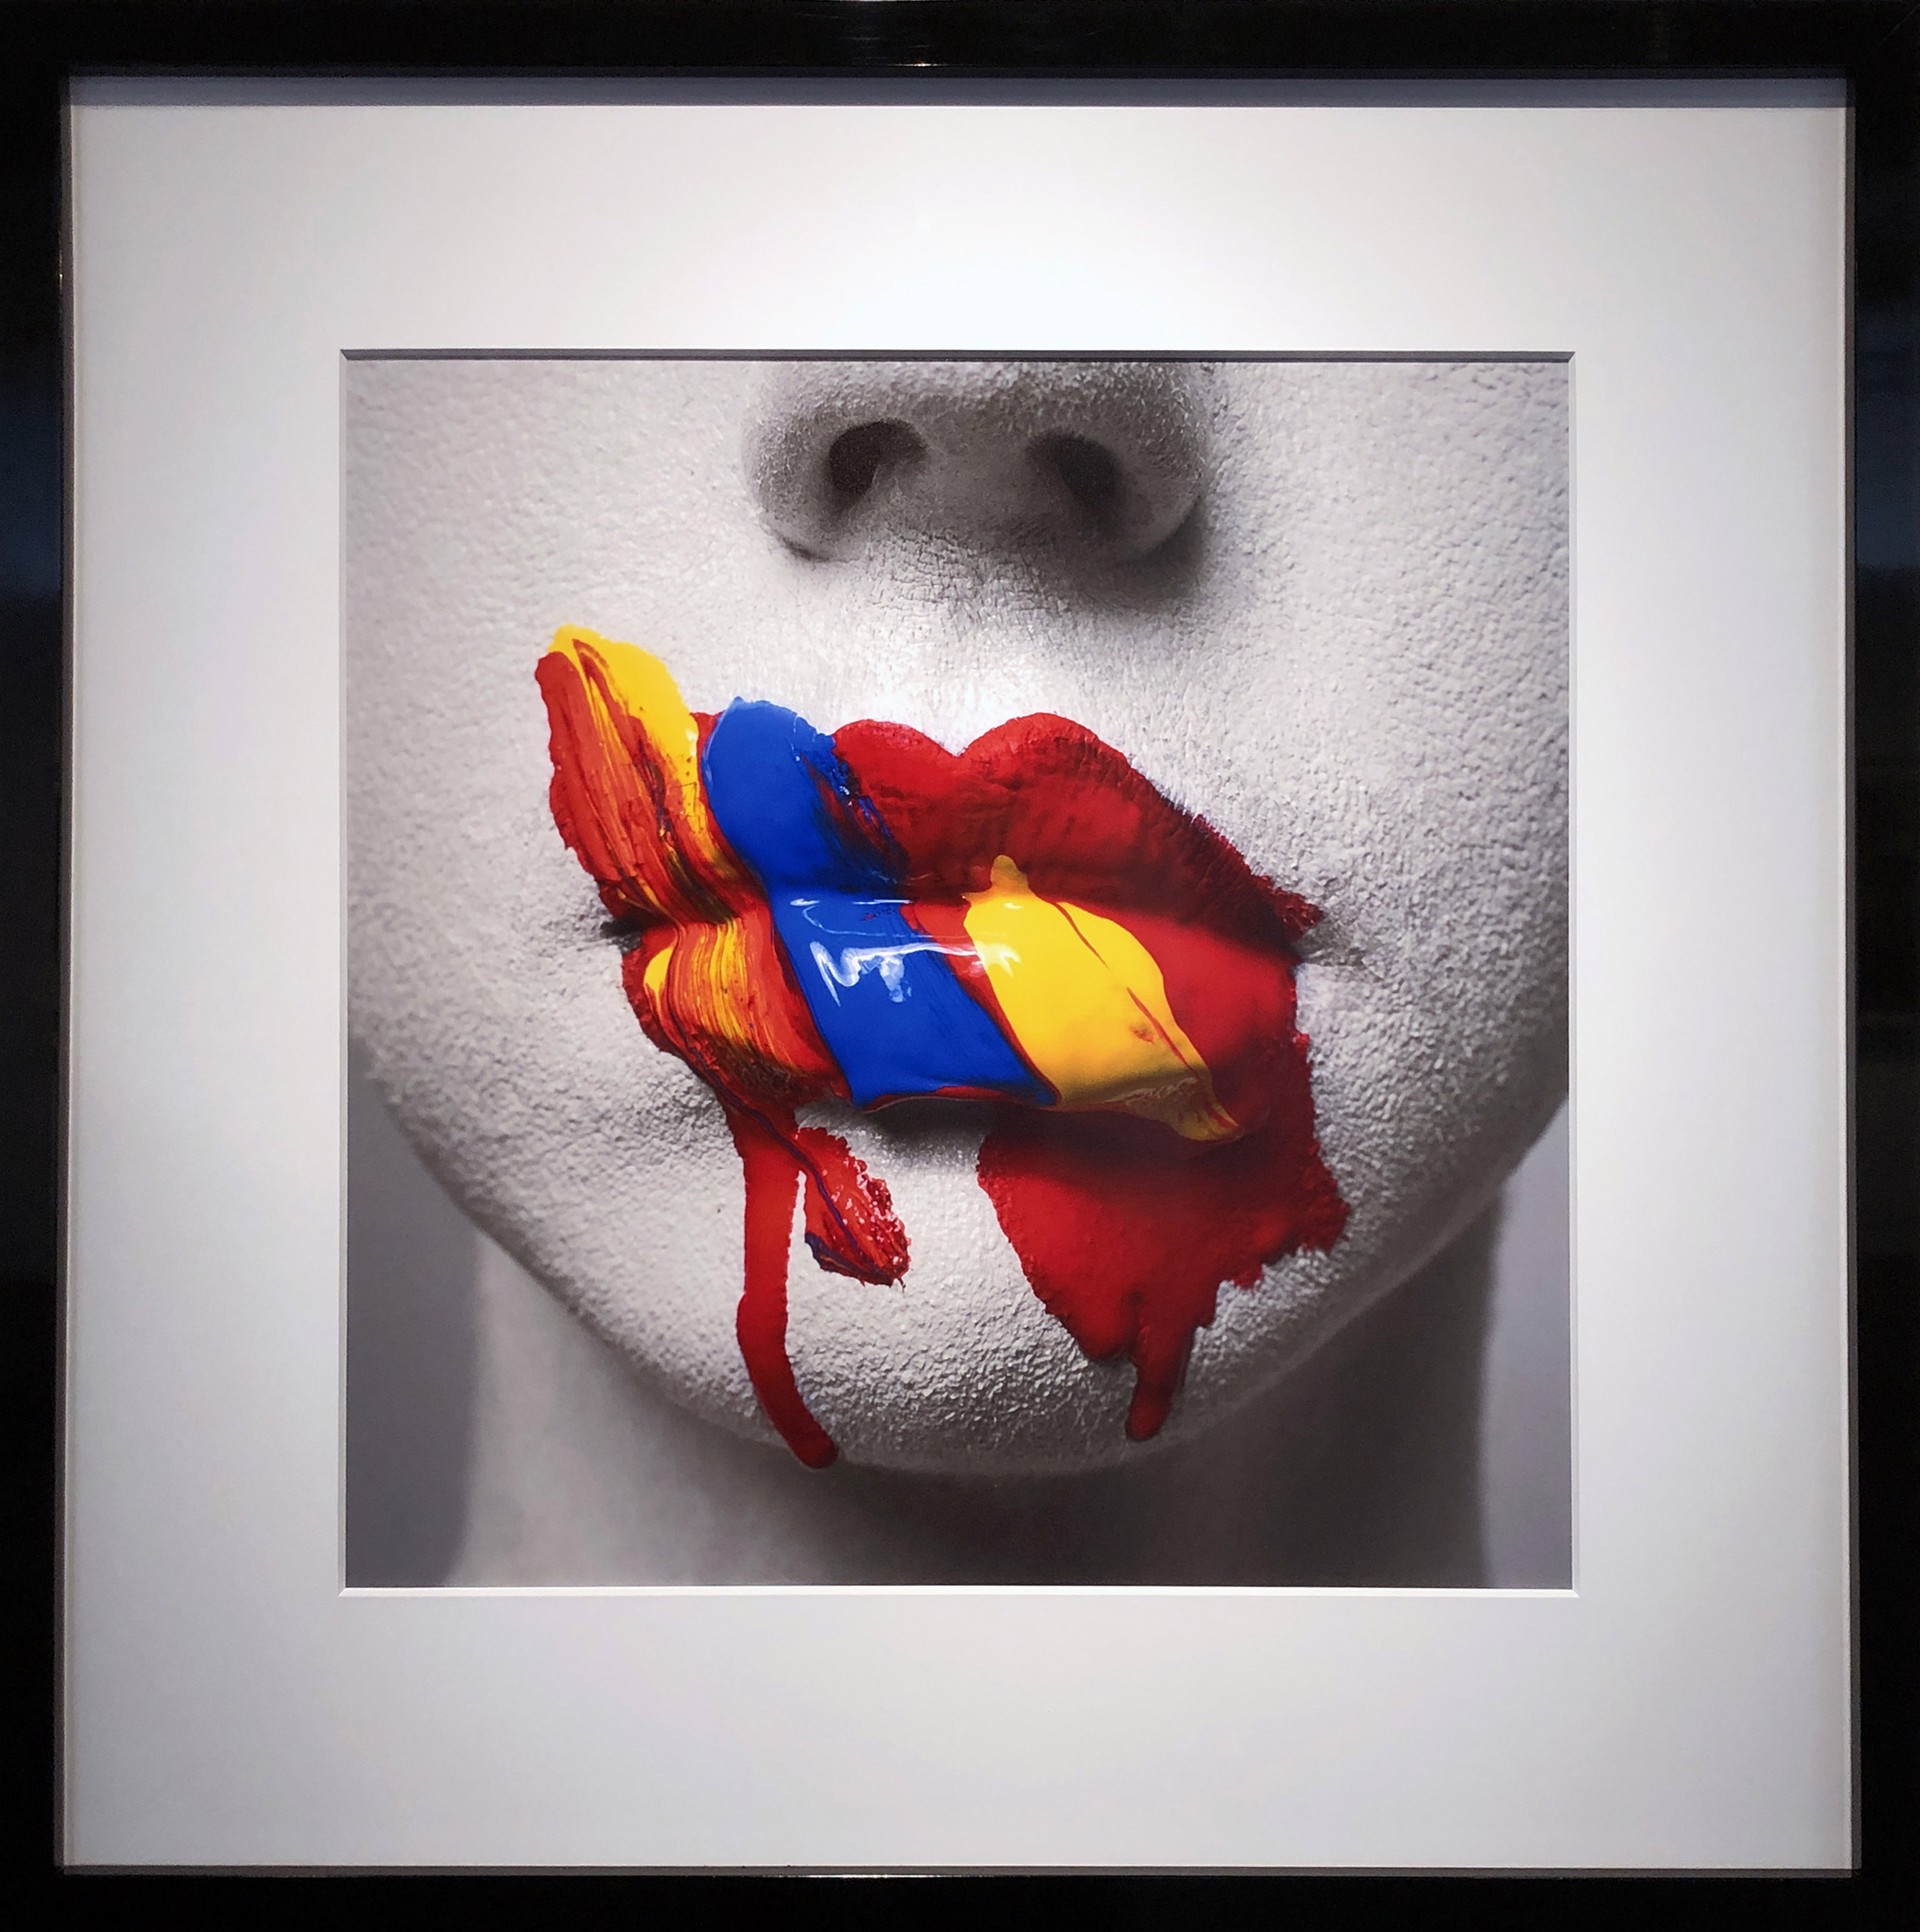 Primary Lips by Tyler Shields